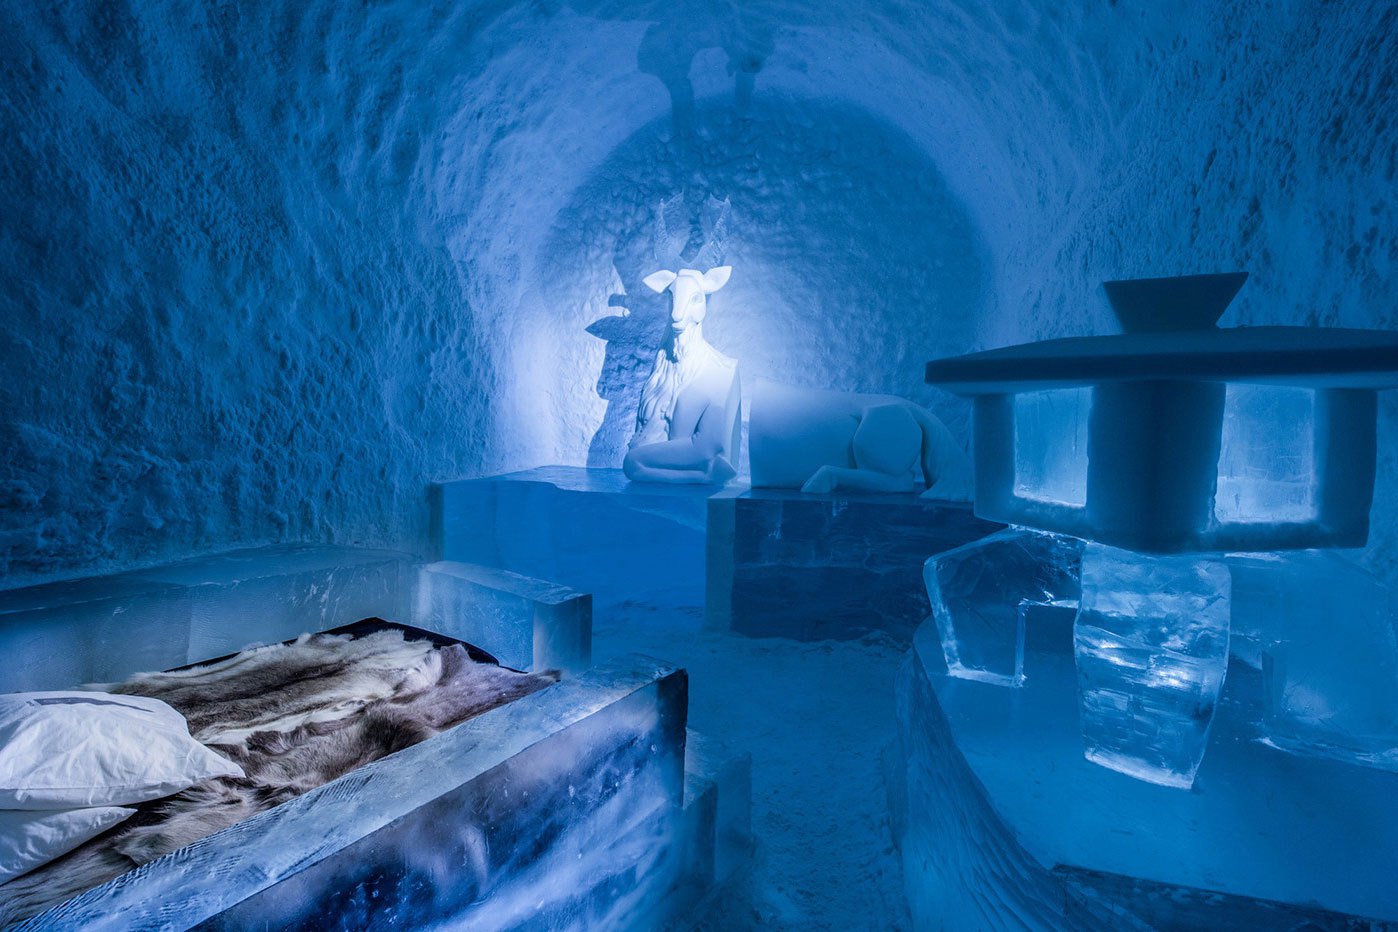 worlds-first-permanent-ice-hotel-4